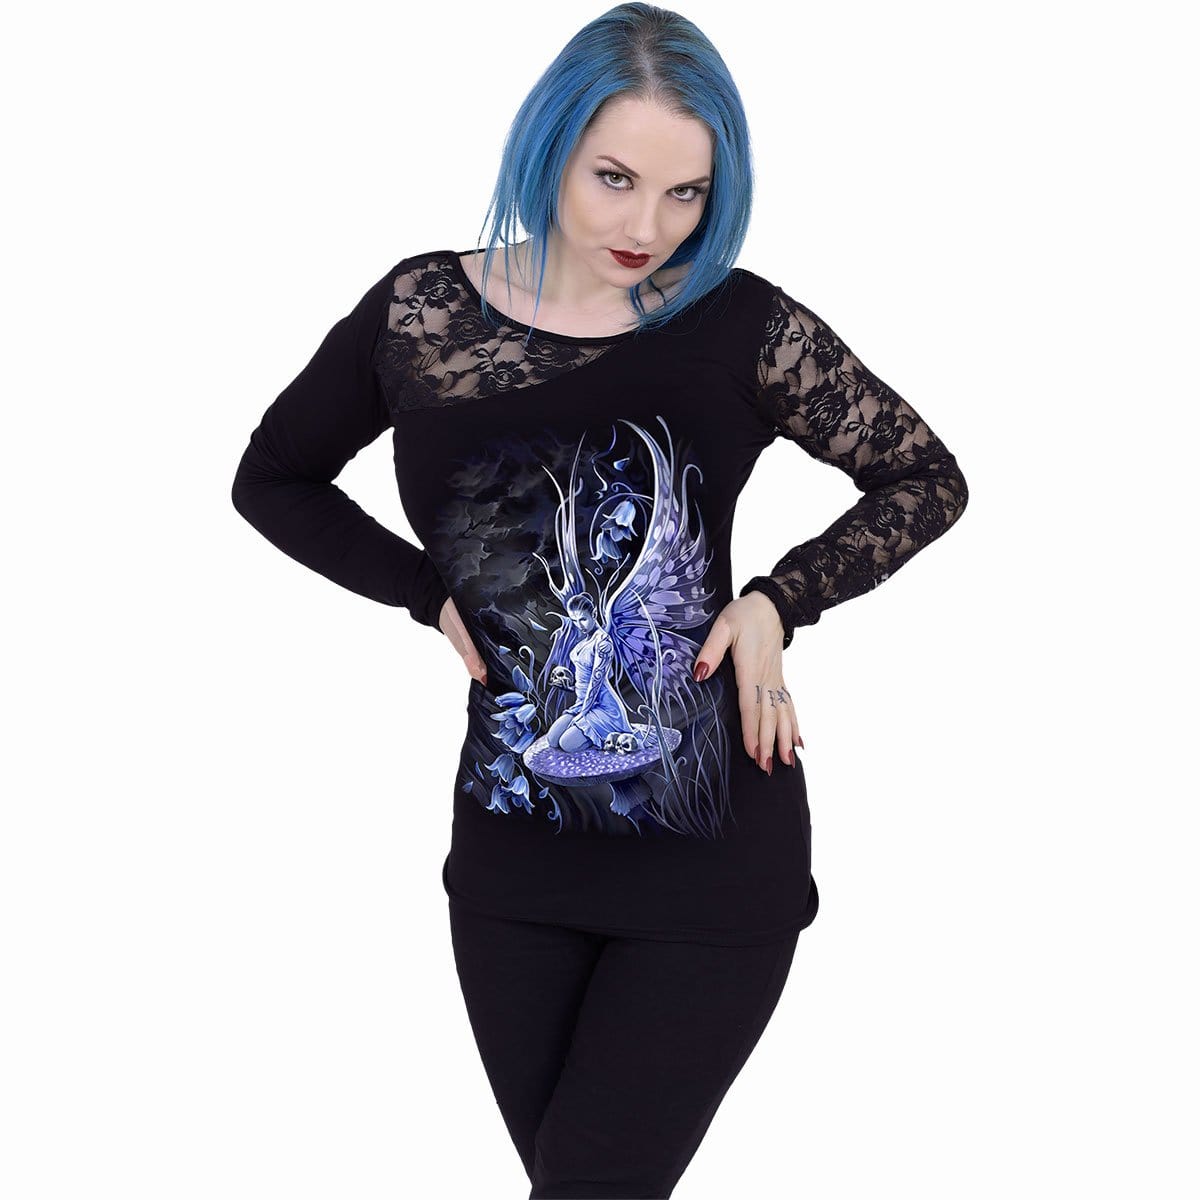 BLUEBELL FAIRY - Lace One Shoulder Top Black - Spiral USA